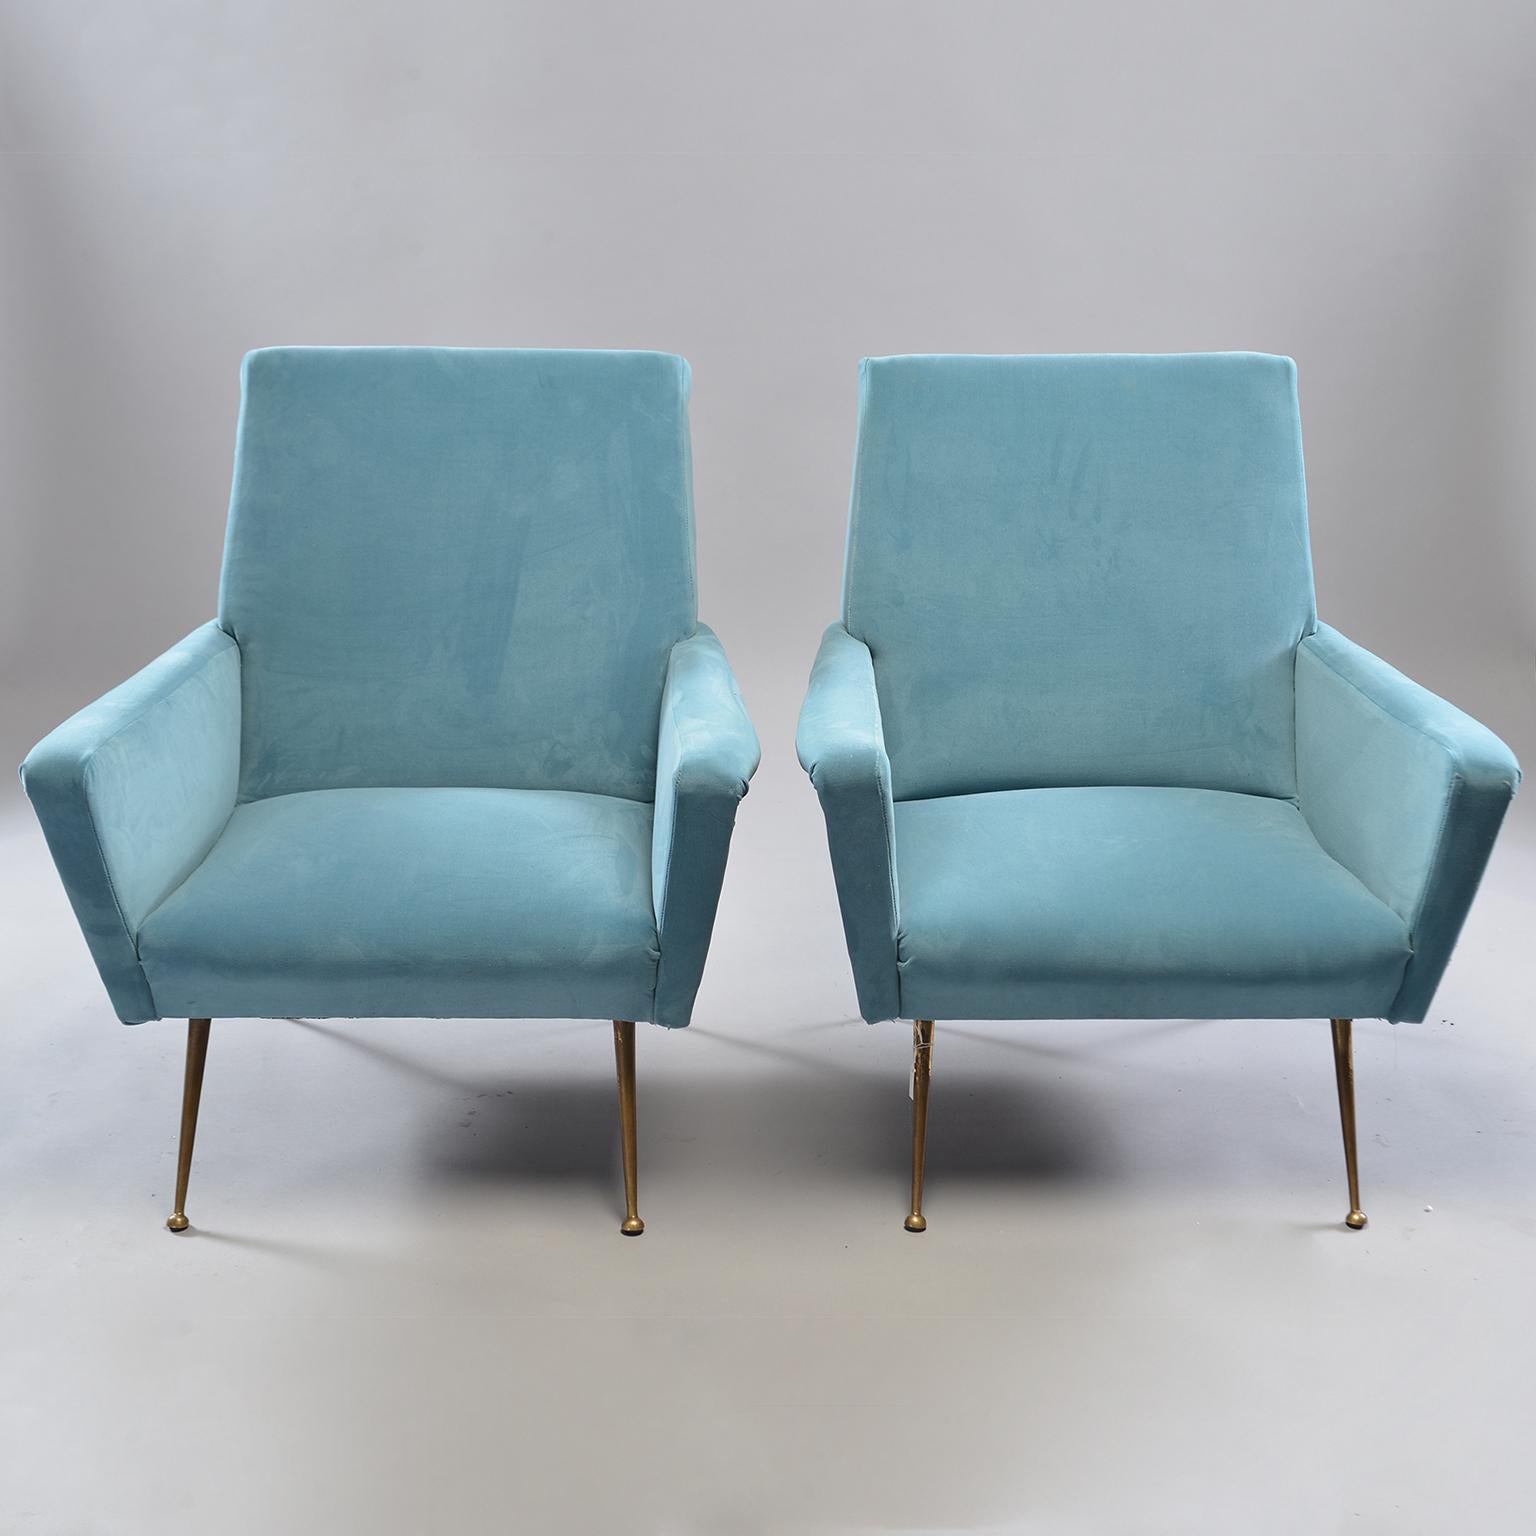 Mid-Century Modern Pair of Midcentury Italian Armchairs with New Upholstery